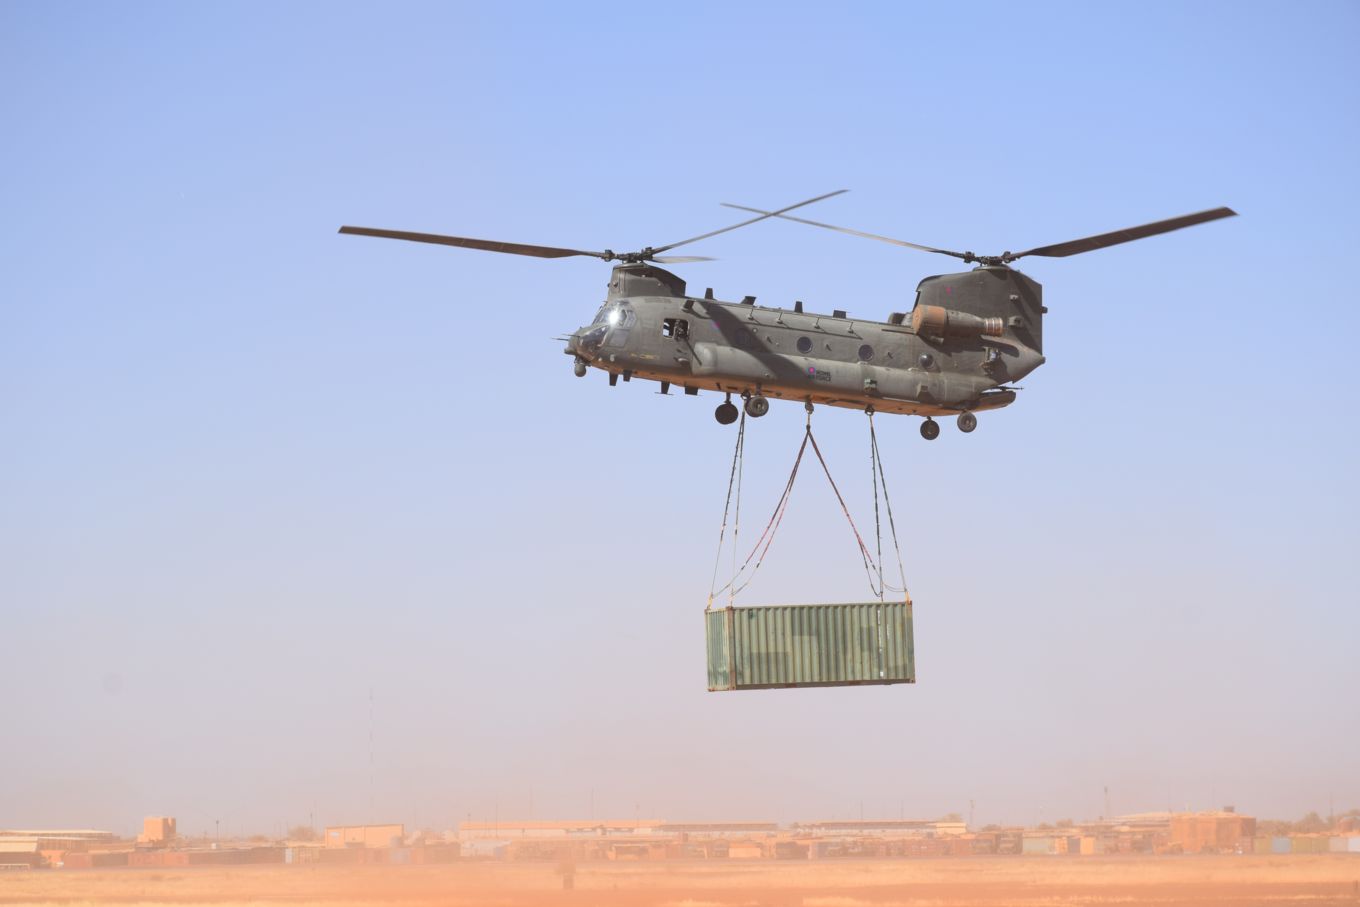 Image shows RAF Chinook in the desert with container hanging below.